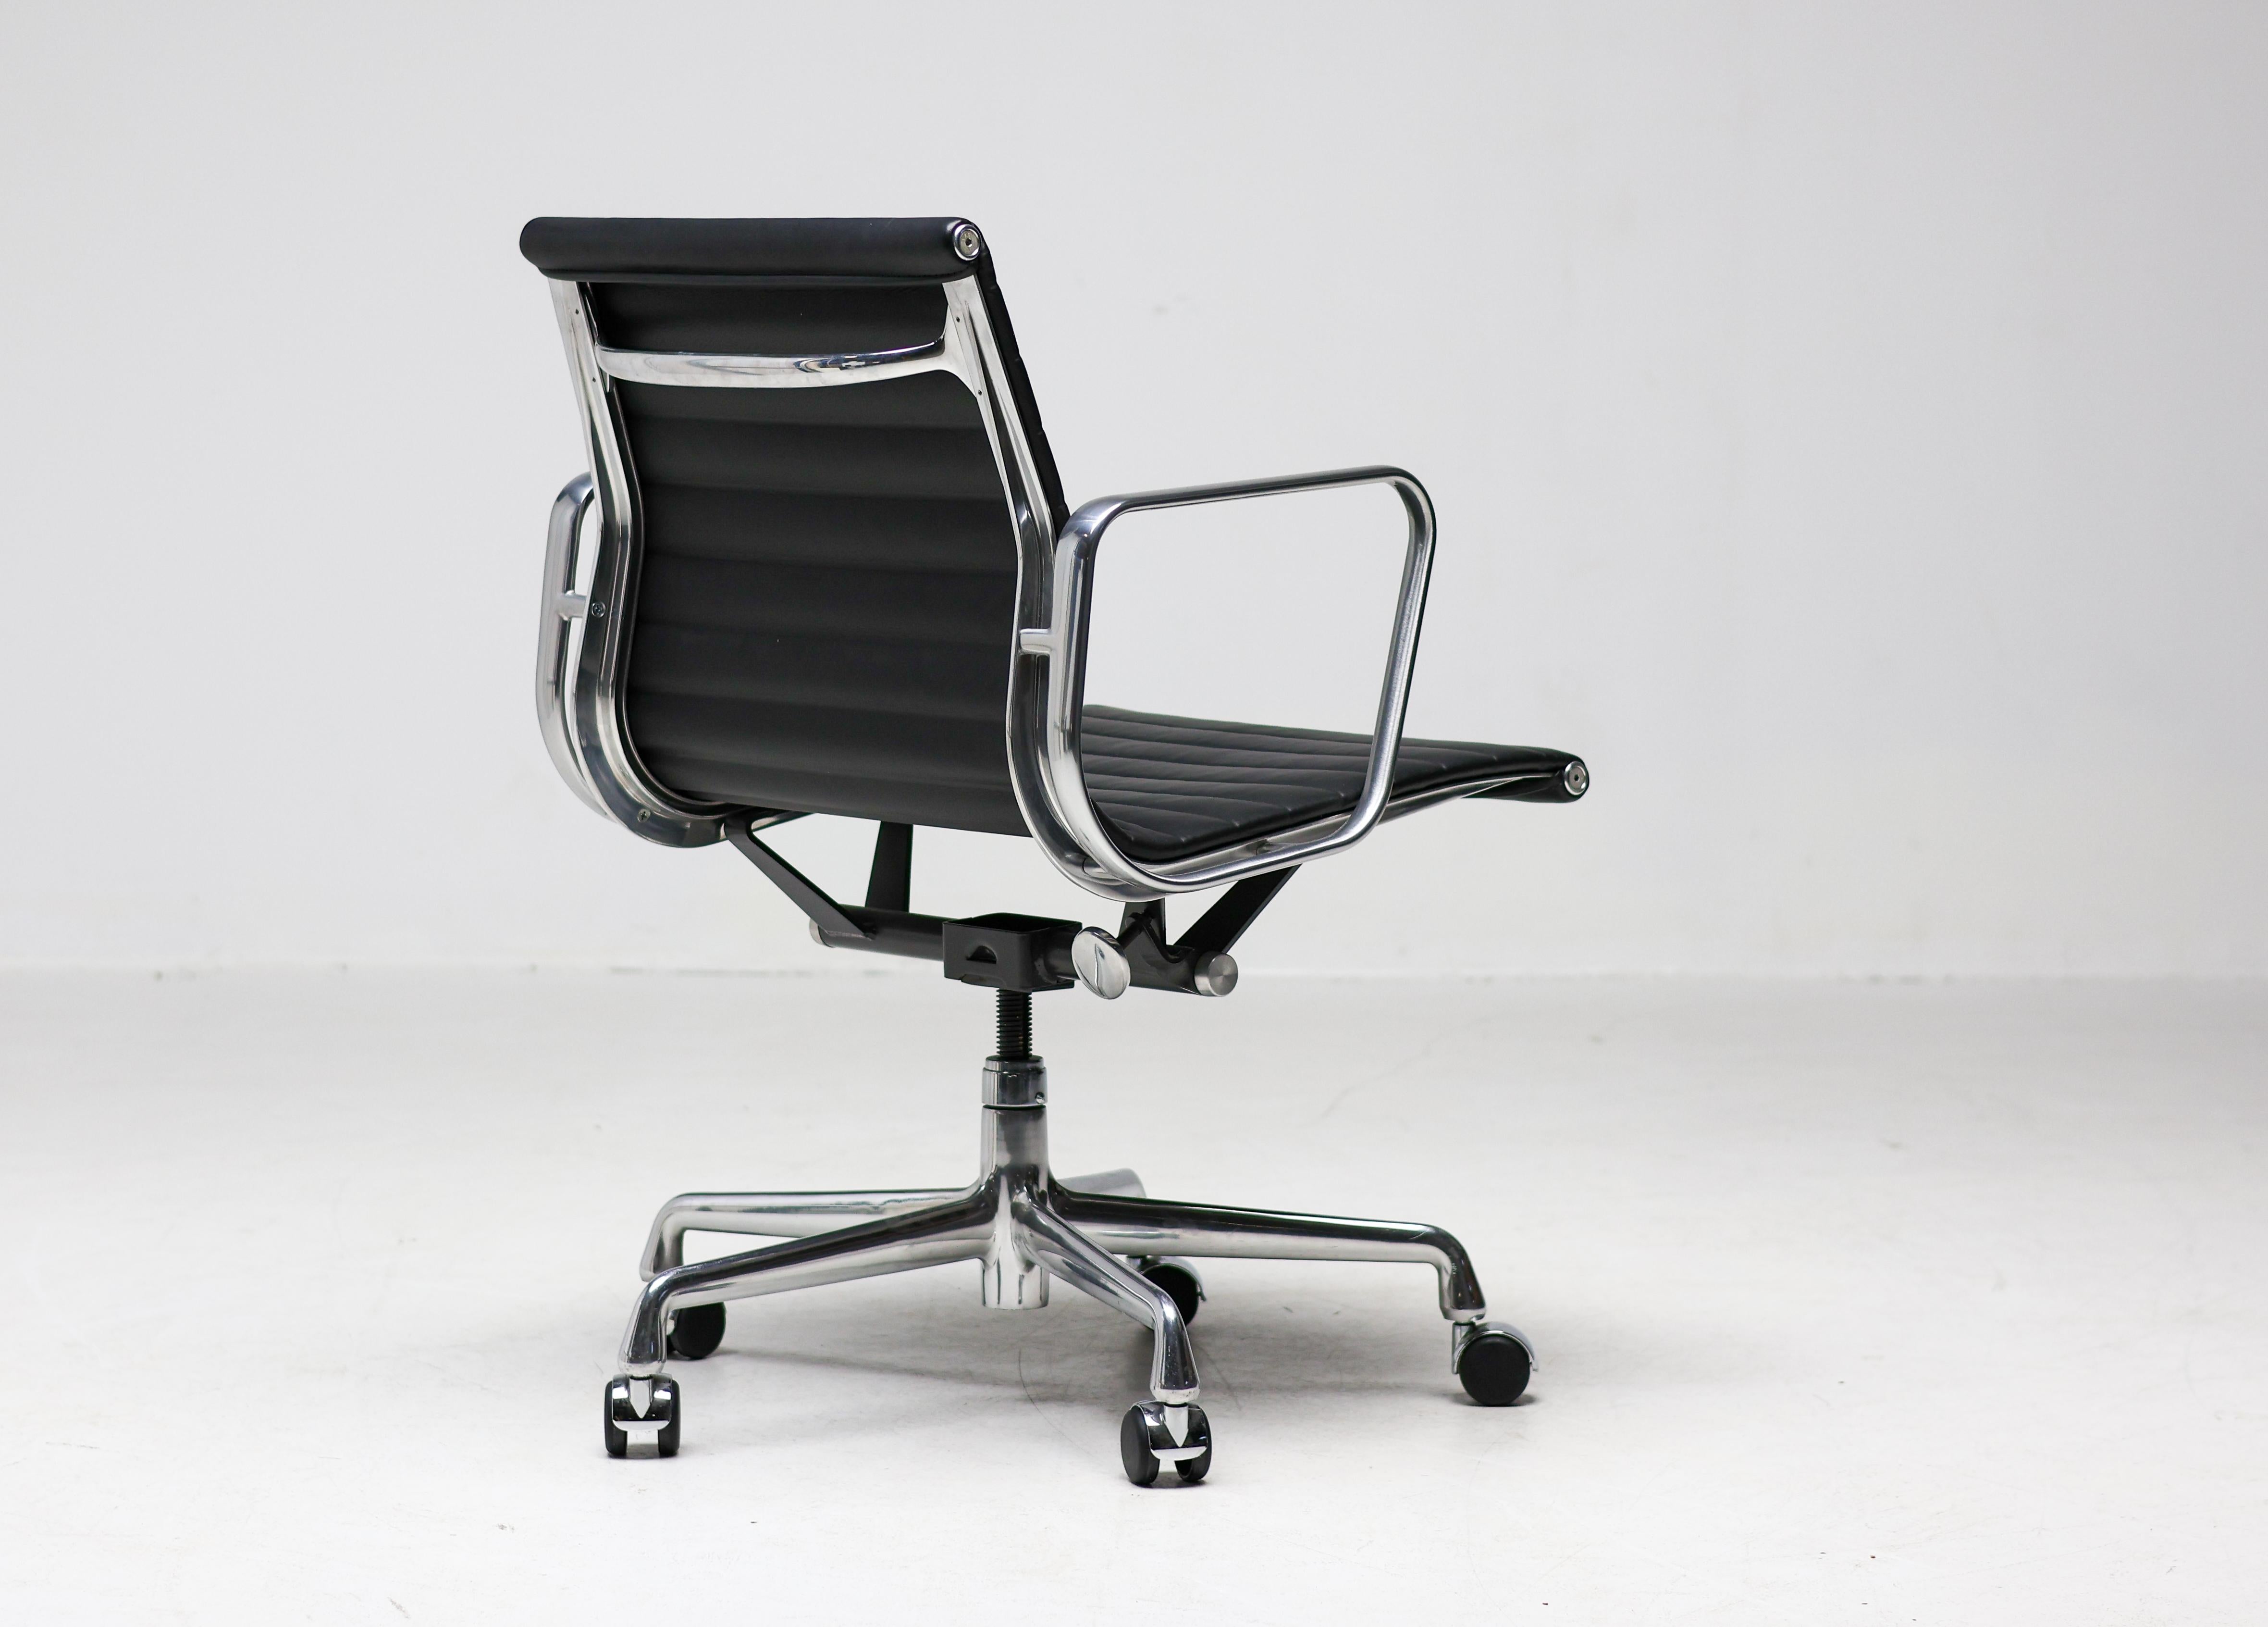 Executive office chair, model EA117, in the USA known as EA335, designed by Charles and Ray Eames for Herman Miller. Backrest and seat in black leather, both front and rear. Frame, armrests and five-star base in die-cast aluminium. Seat mechanism